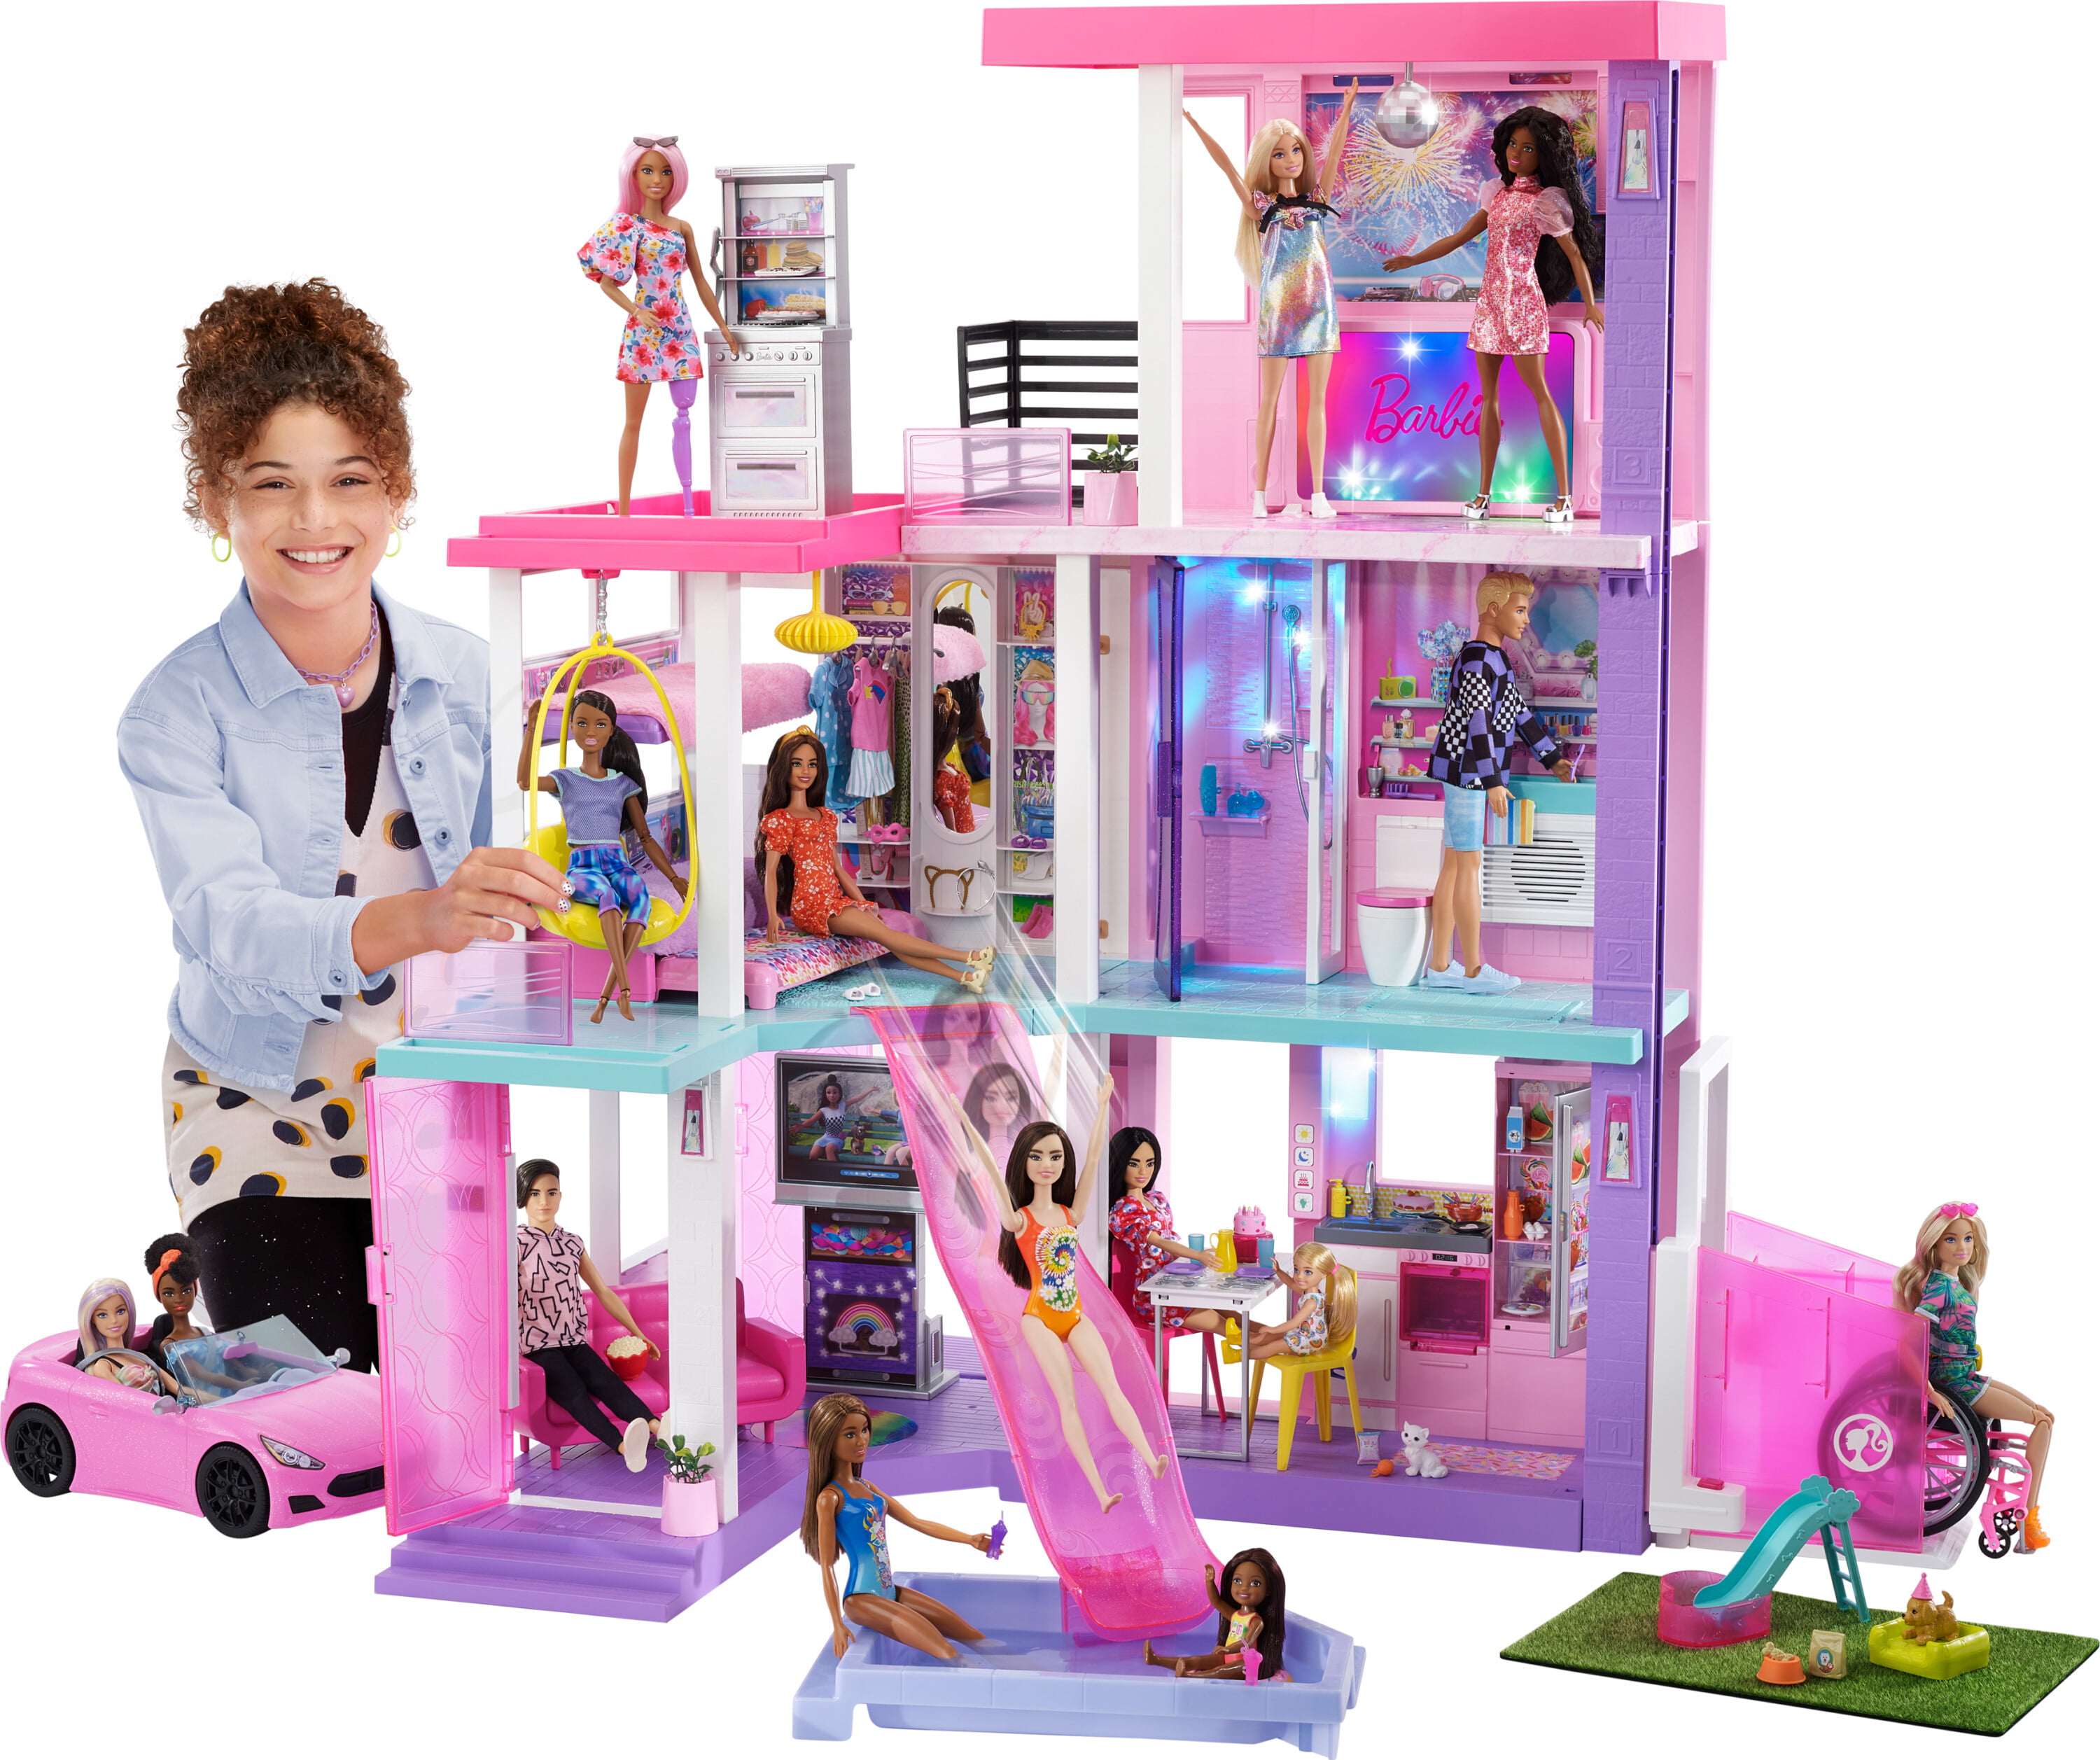 Deluxe Barbie Special Edition 60th DreamHouse Playset with 2 Dolls, Barbie, Car, 100+ Pieces